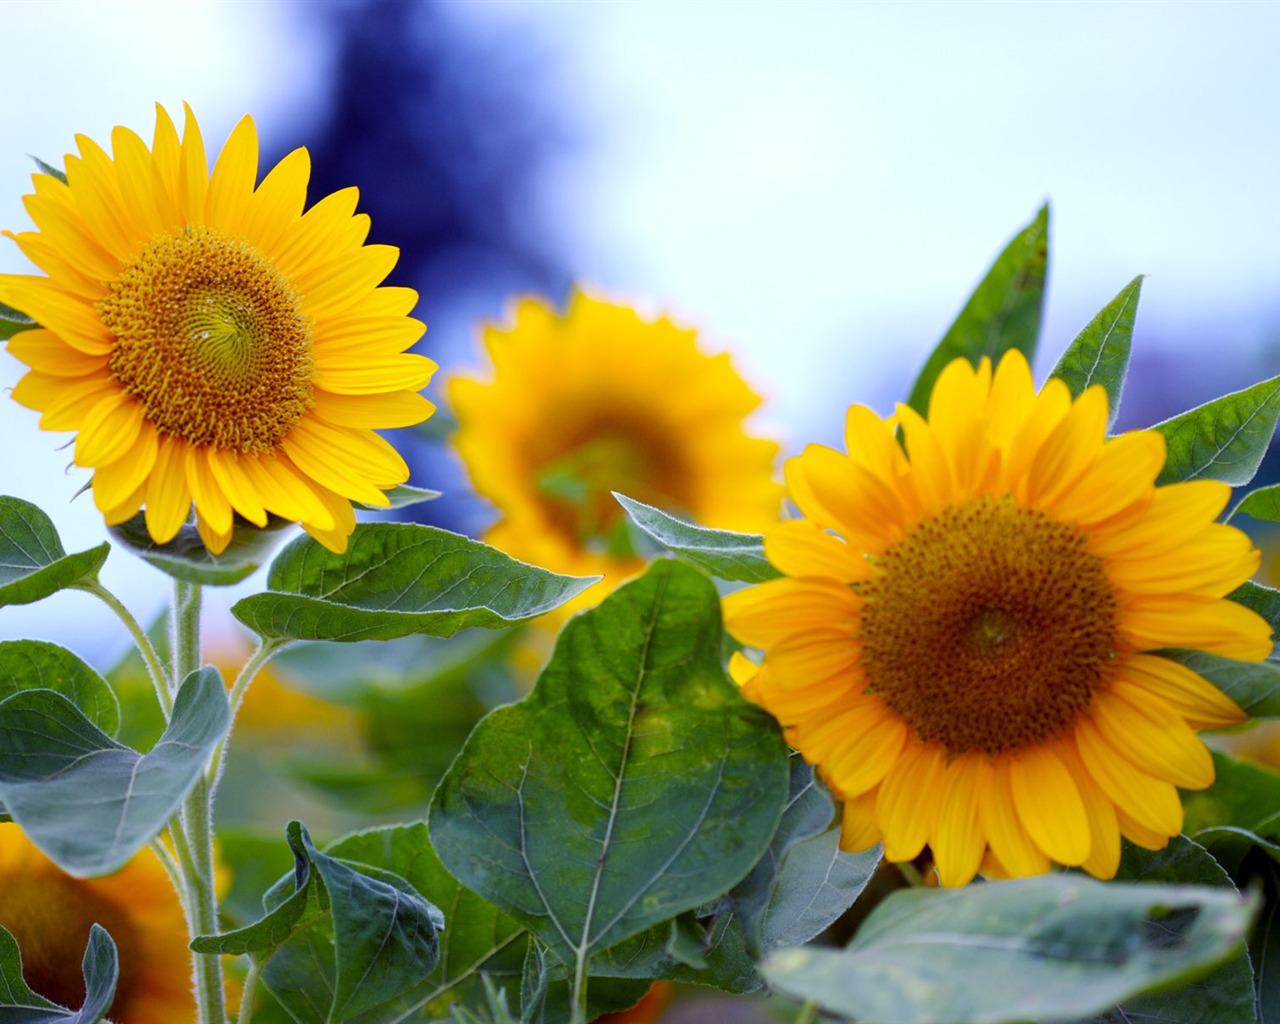 Sunny sunflower photo HD Wallpapers #23 - 1280x1024